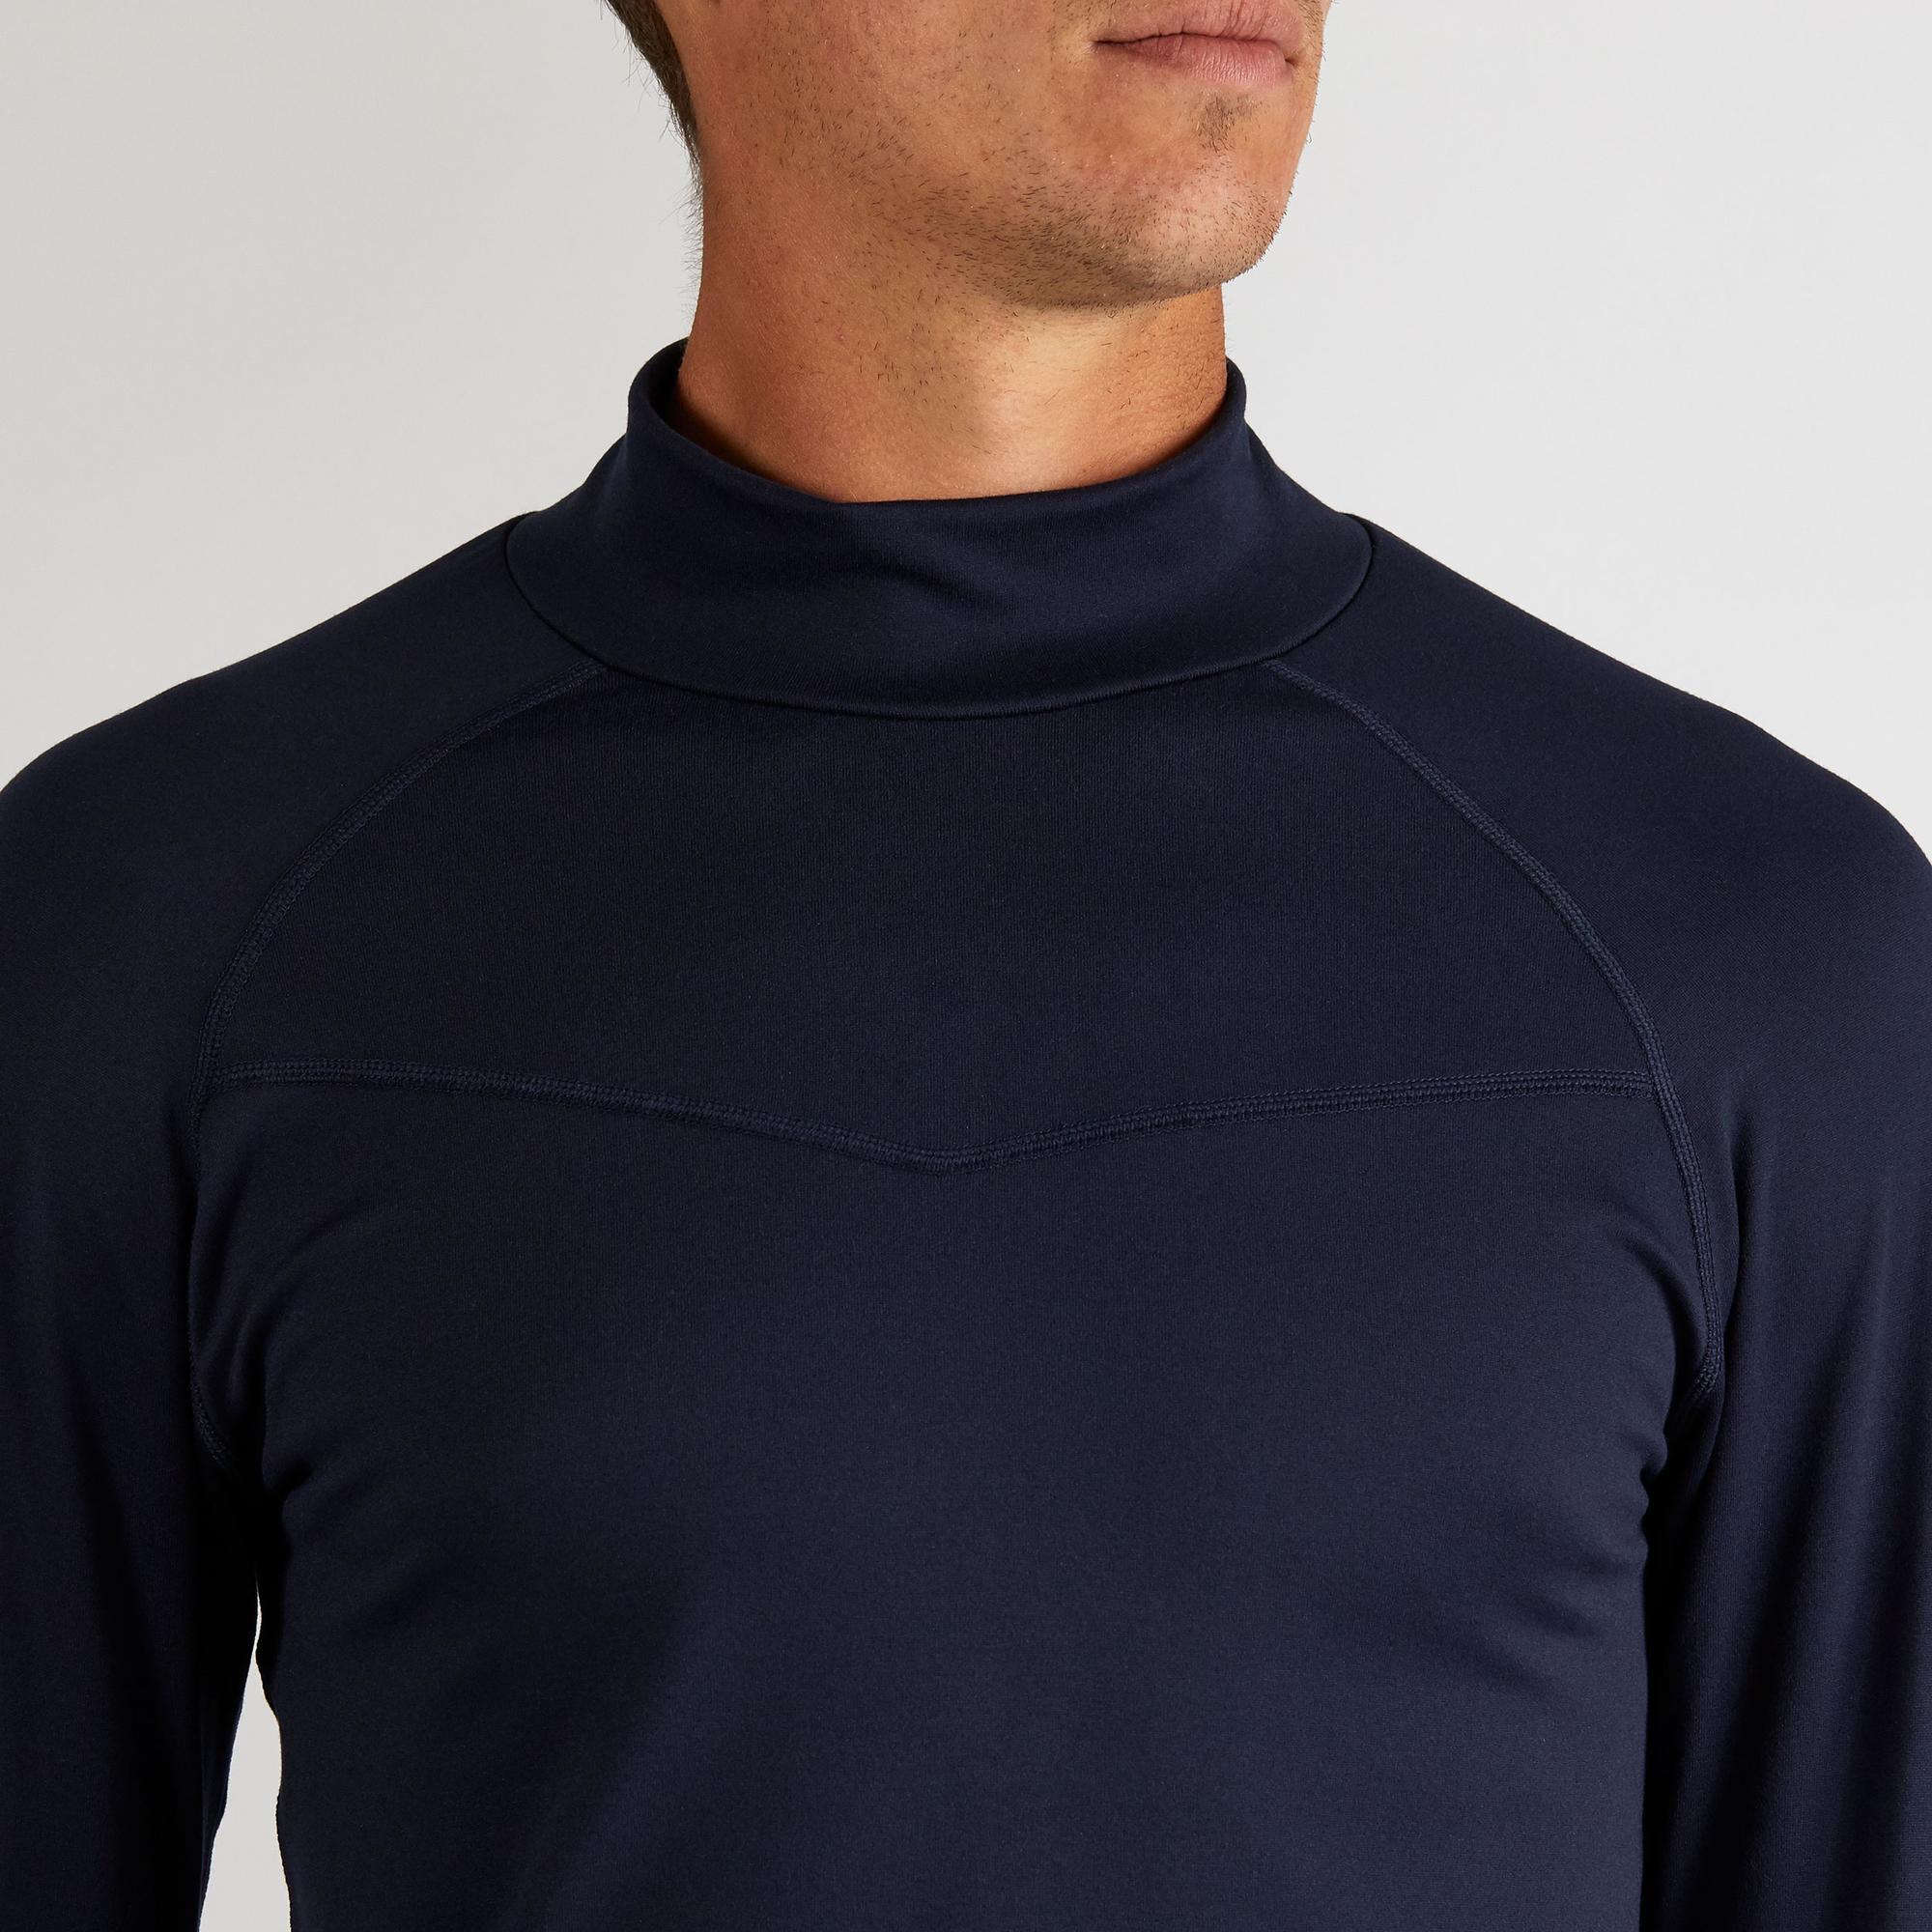 sous pull homme col montant decathlon